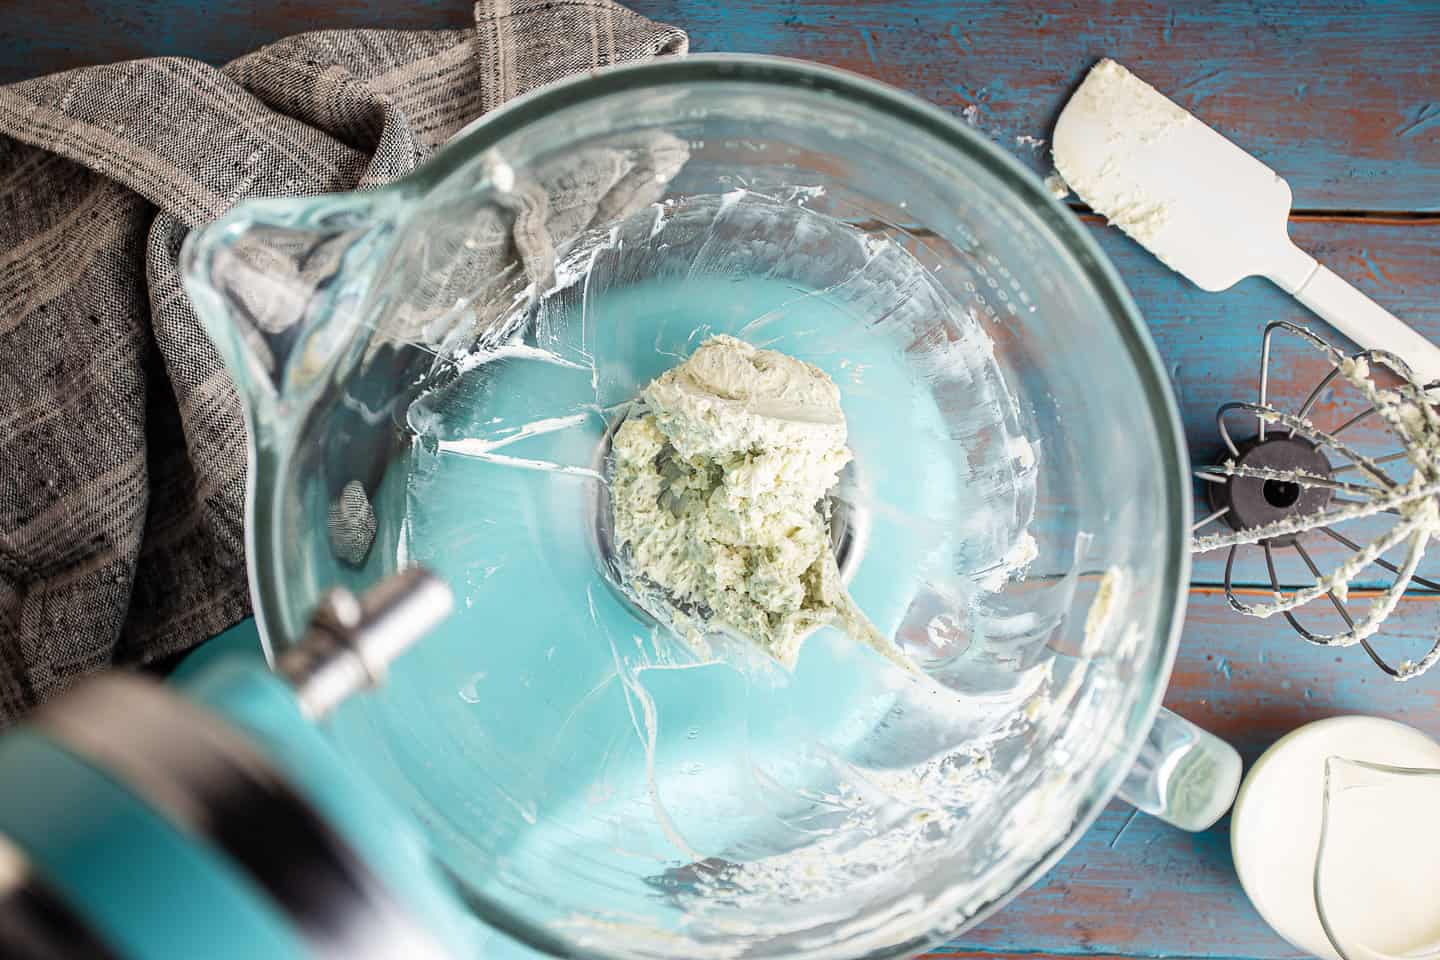 Blue cheese, cream cheese, and seasonings, blended together and scraped down from the sides of the bowl with a silicone spatula.